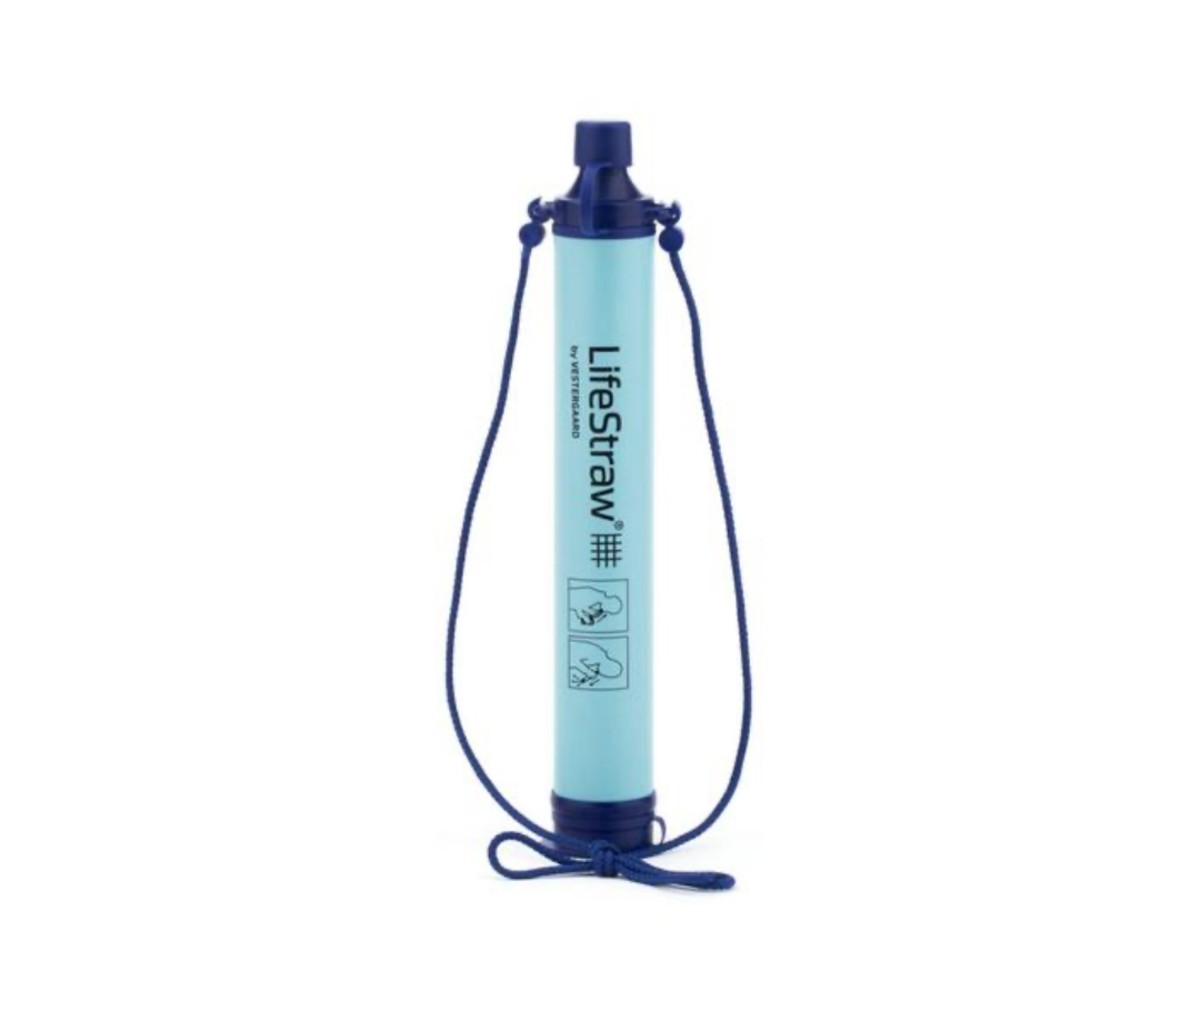 LifeStraw water filtration devices